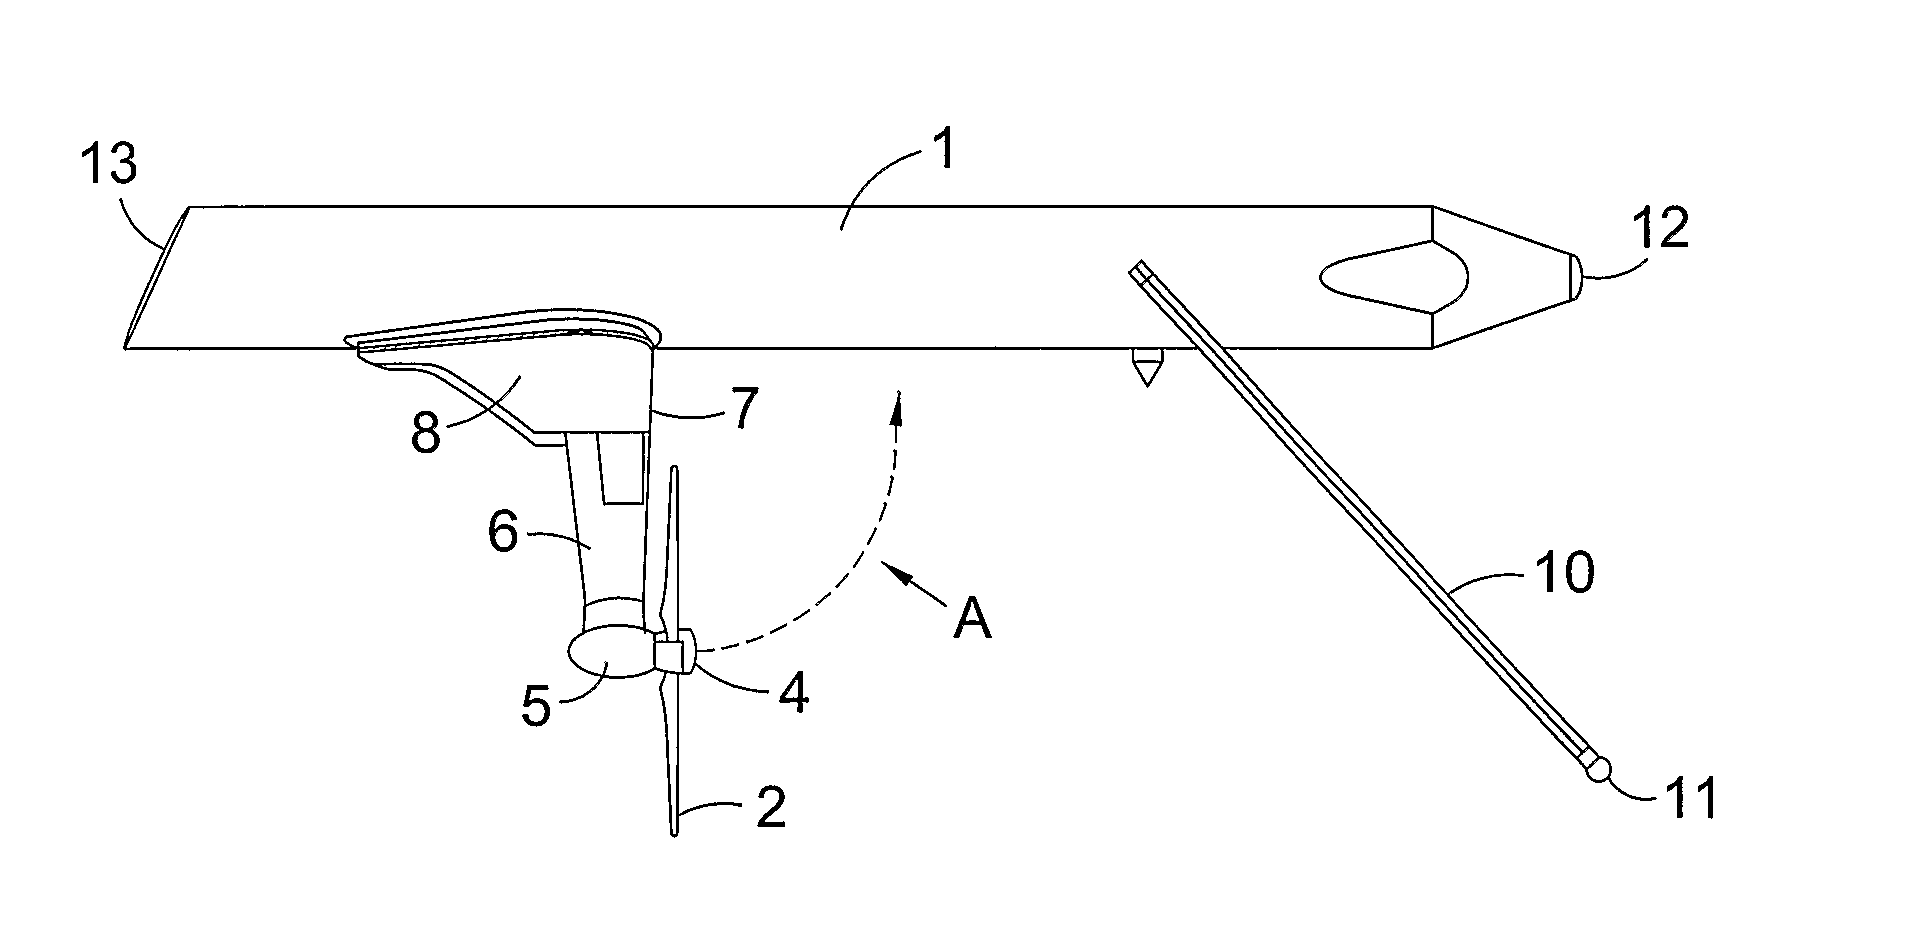 Water current powered generating apparatus